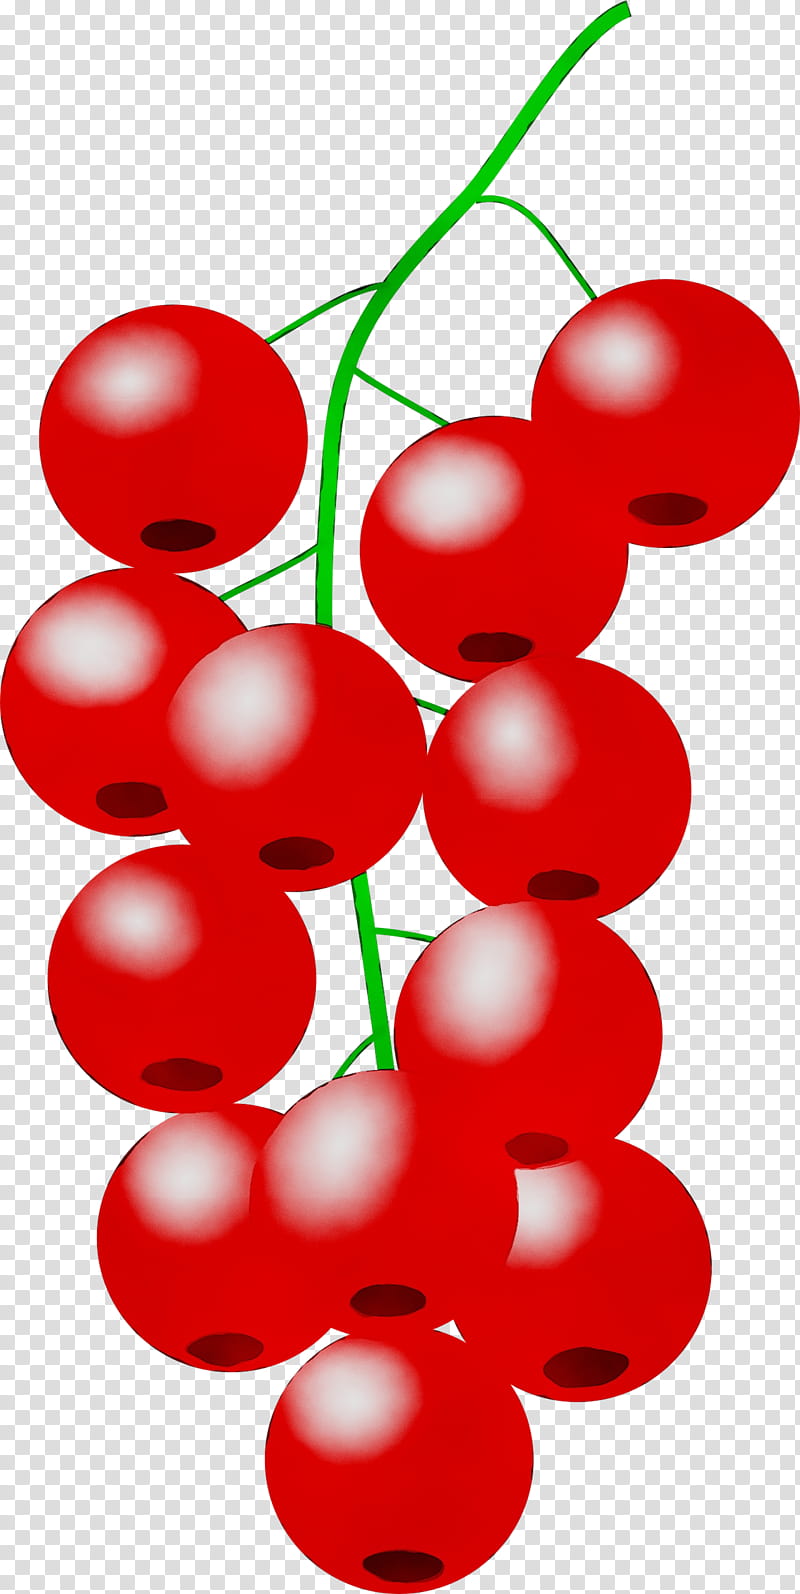 Red Flower, Lingonberry, Cherries, Fruit, Grape, Stxea Nr Eur, Currant, Microsoft PowerPoint transparent background PNG clipart